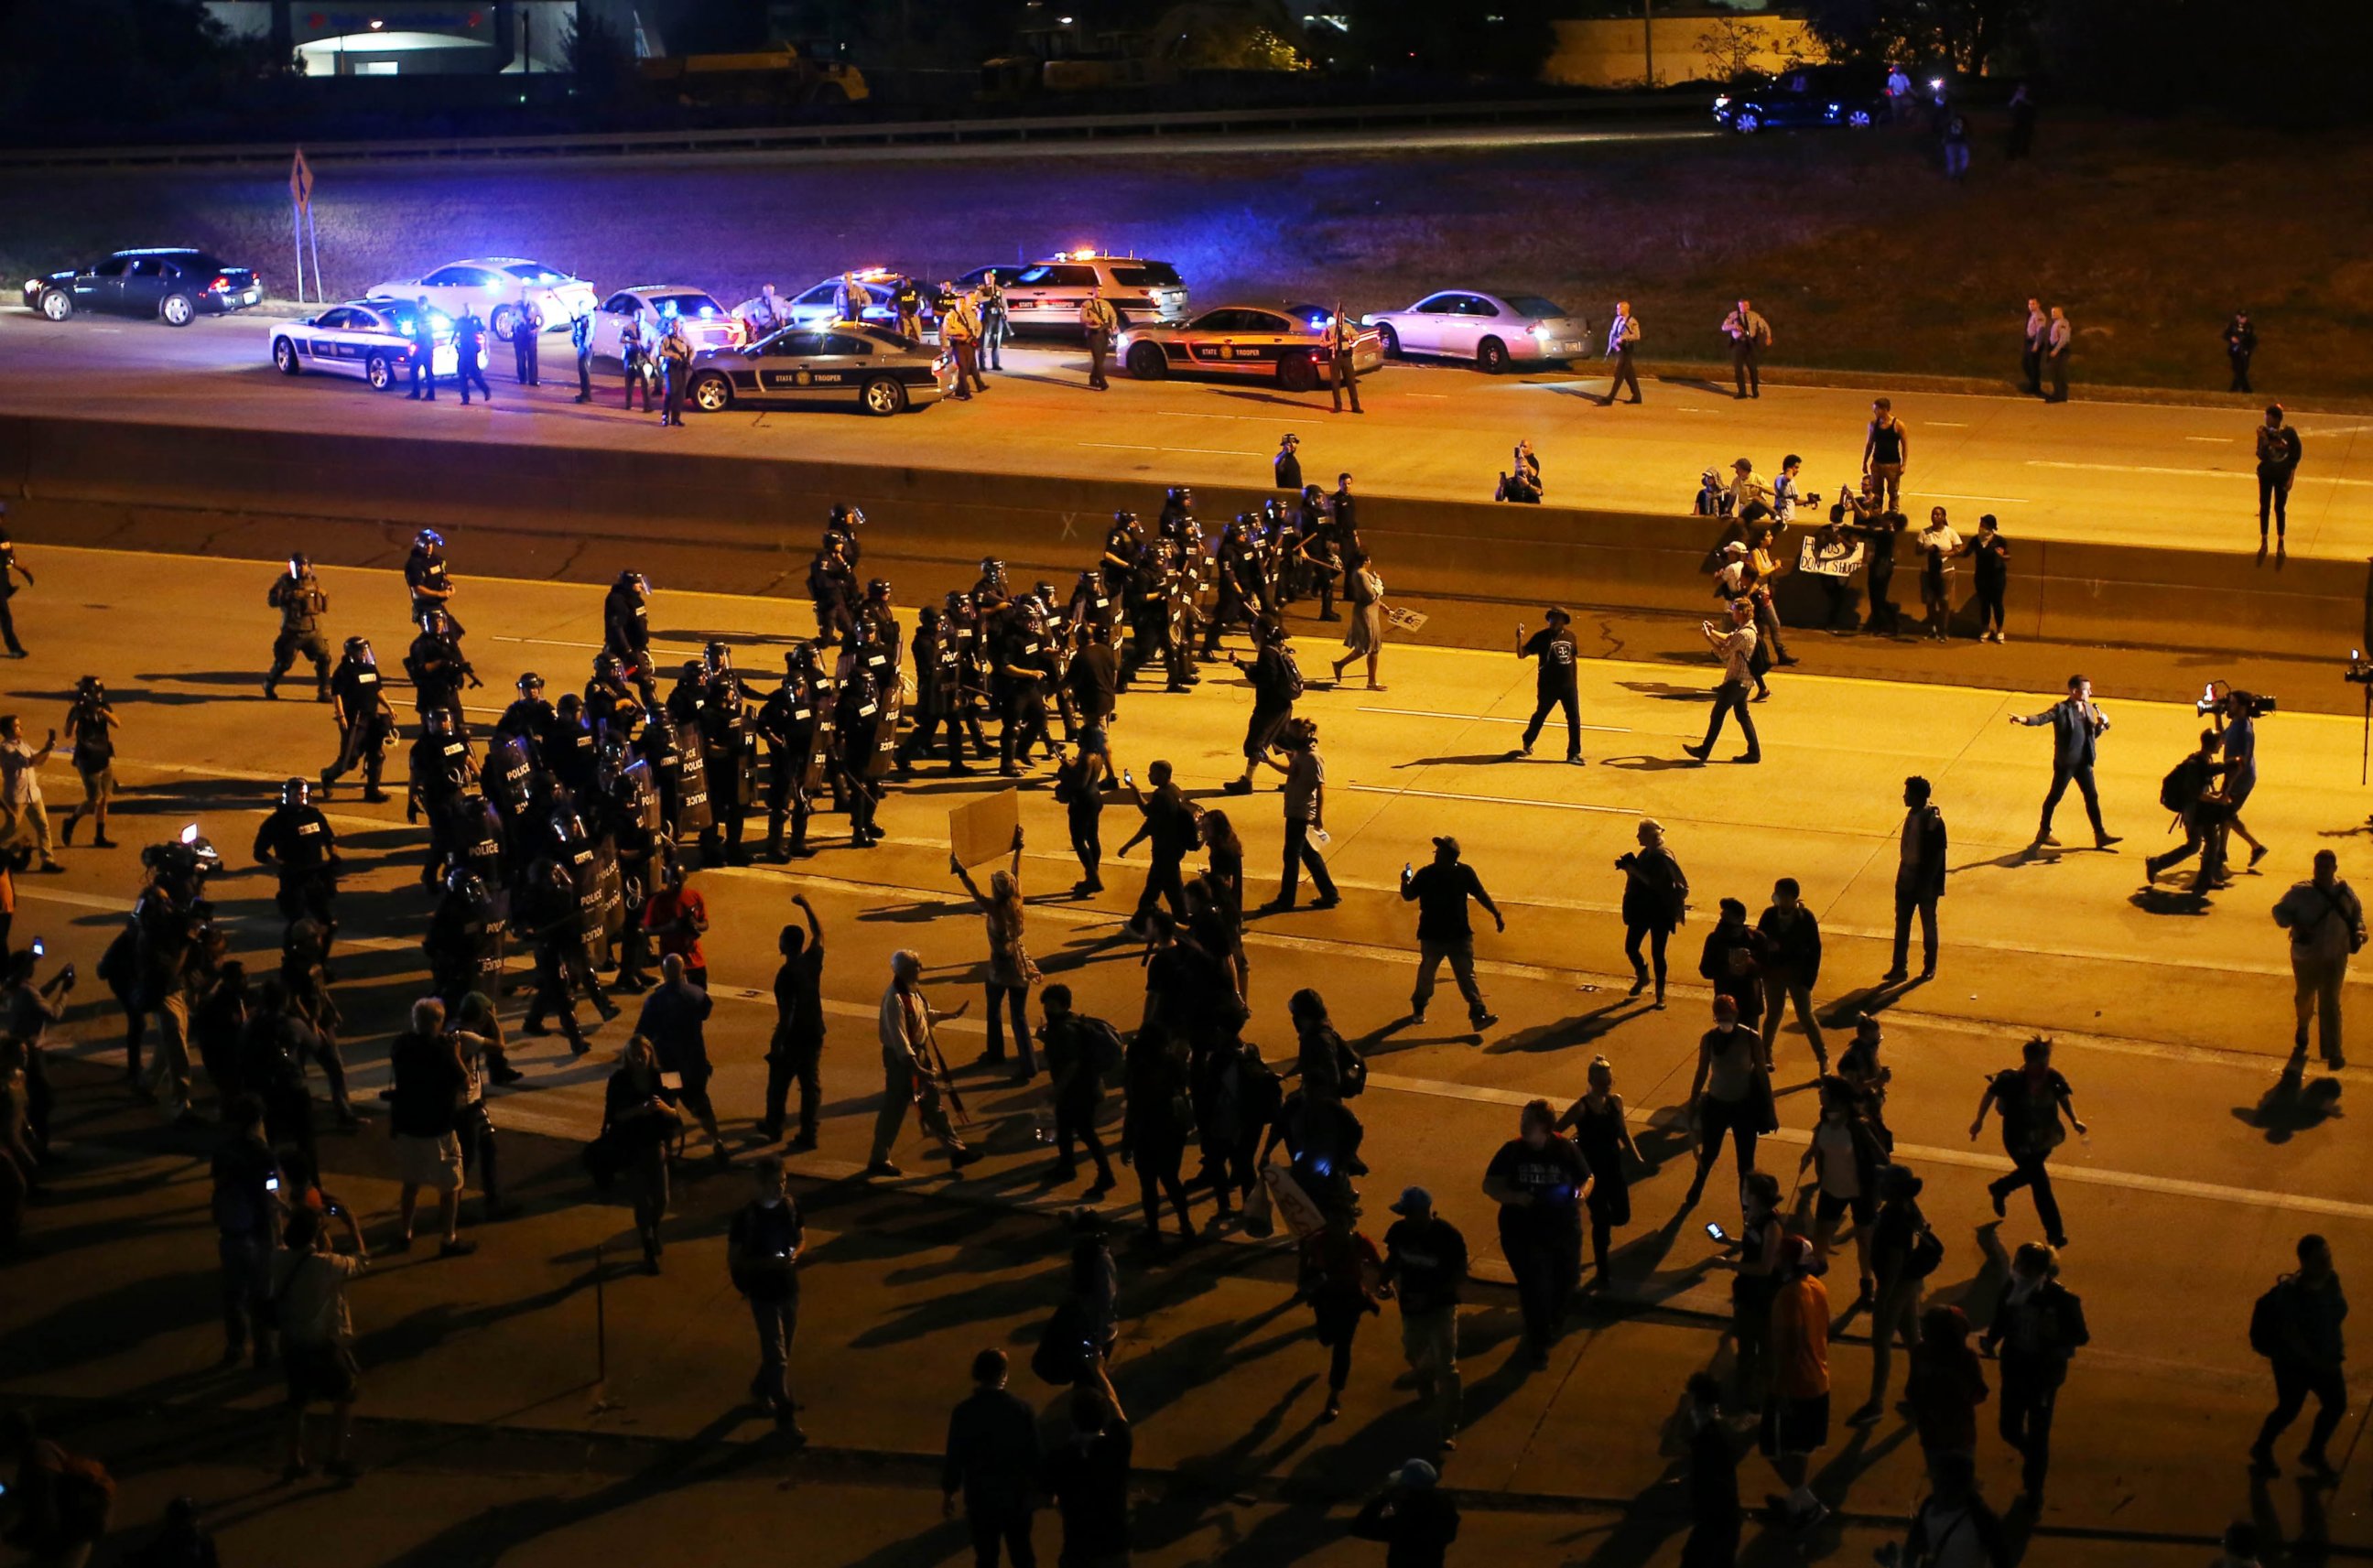 PHOTO: Riot police push protesters off the highway during another night of protests over the police shooting of Keith Scott in Charlotte, North Carolina. Sept. 22, 2016. 